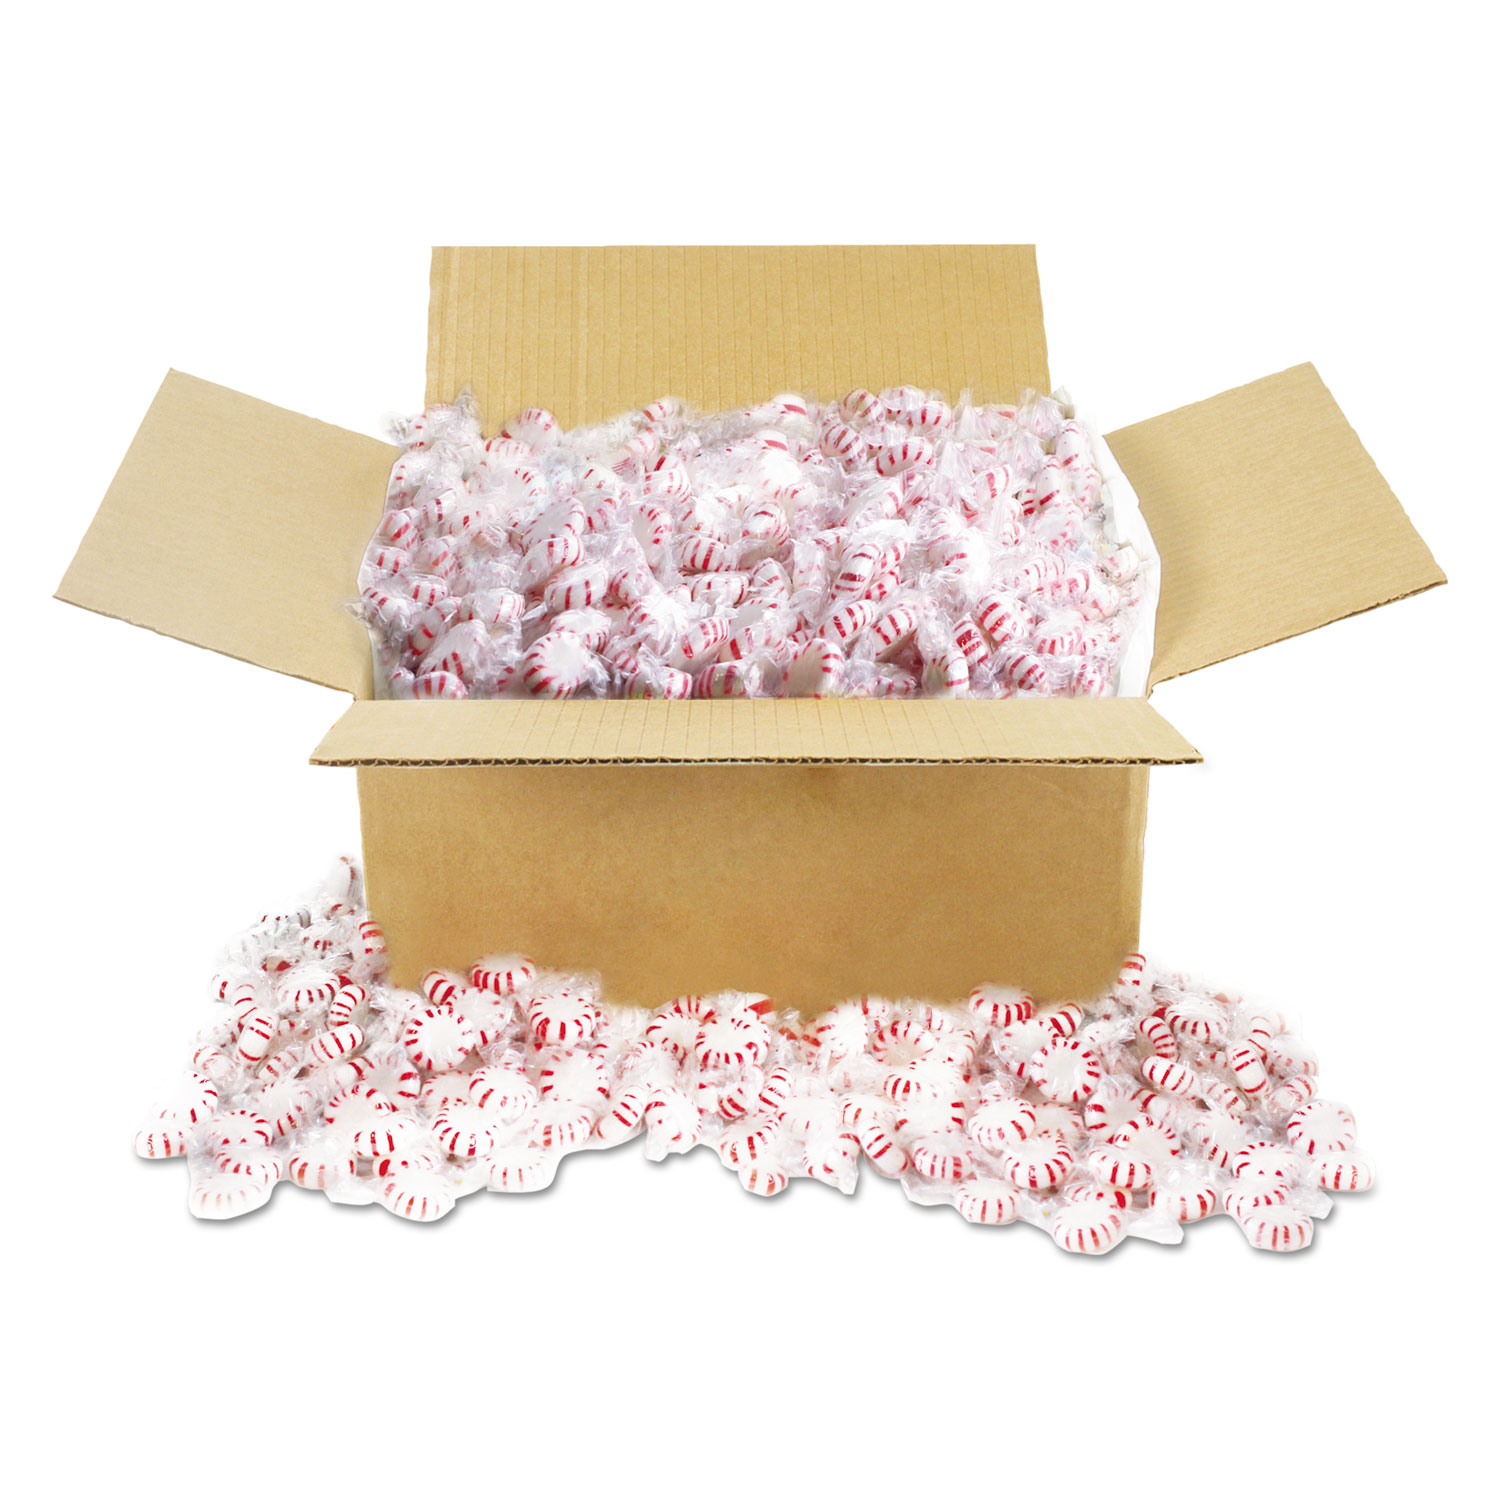  Office Snax 00602 Candy Tubs, Starlight Peppermints, Individually Wrapped, 10 lb Value Size Box (OFX00602) 